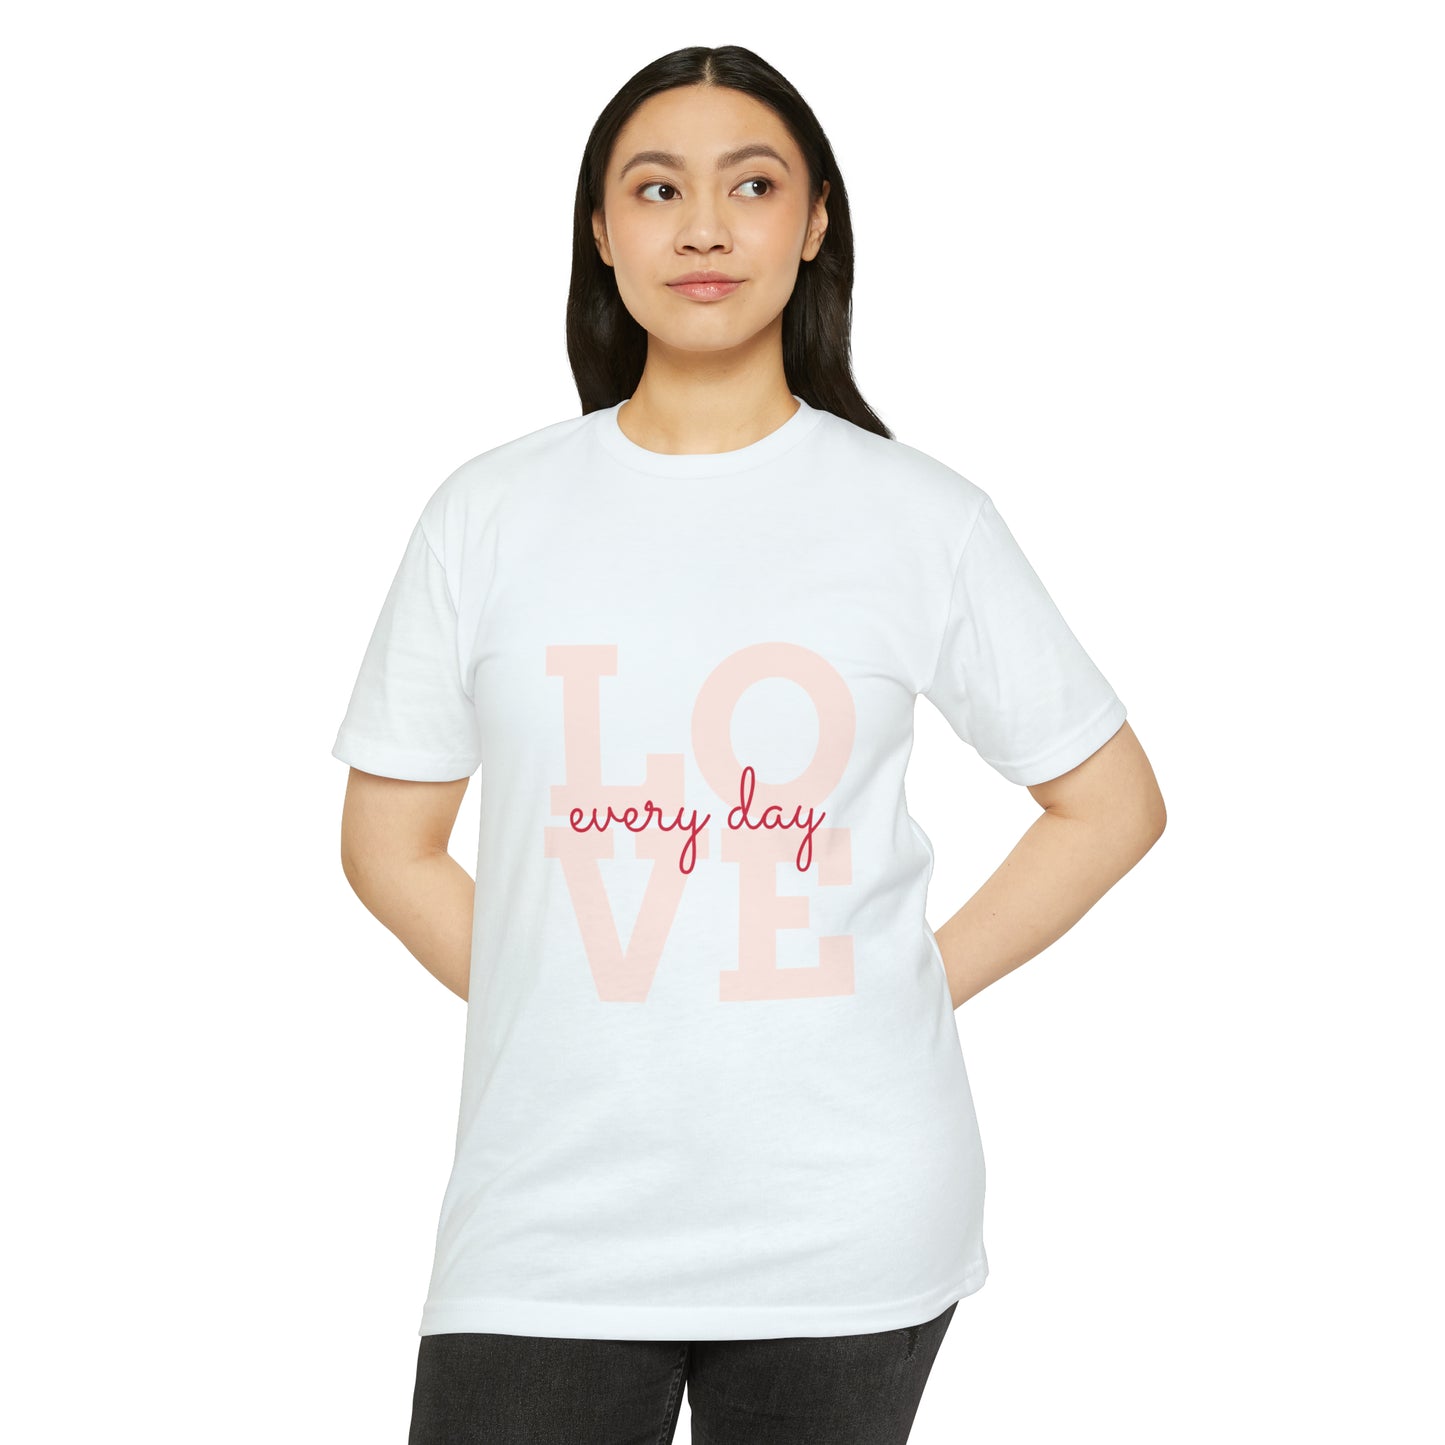 Neduz Love Every Day Unisex CVC Jersey Tee - Soft & Durable Blend for All Styles